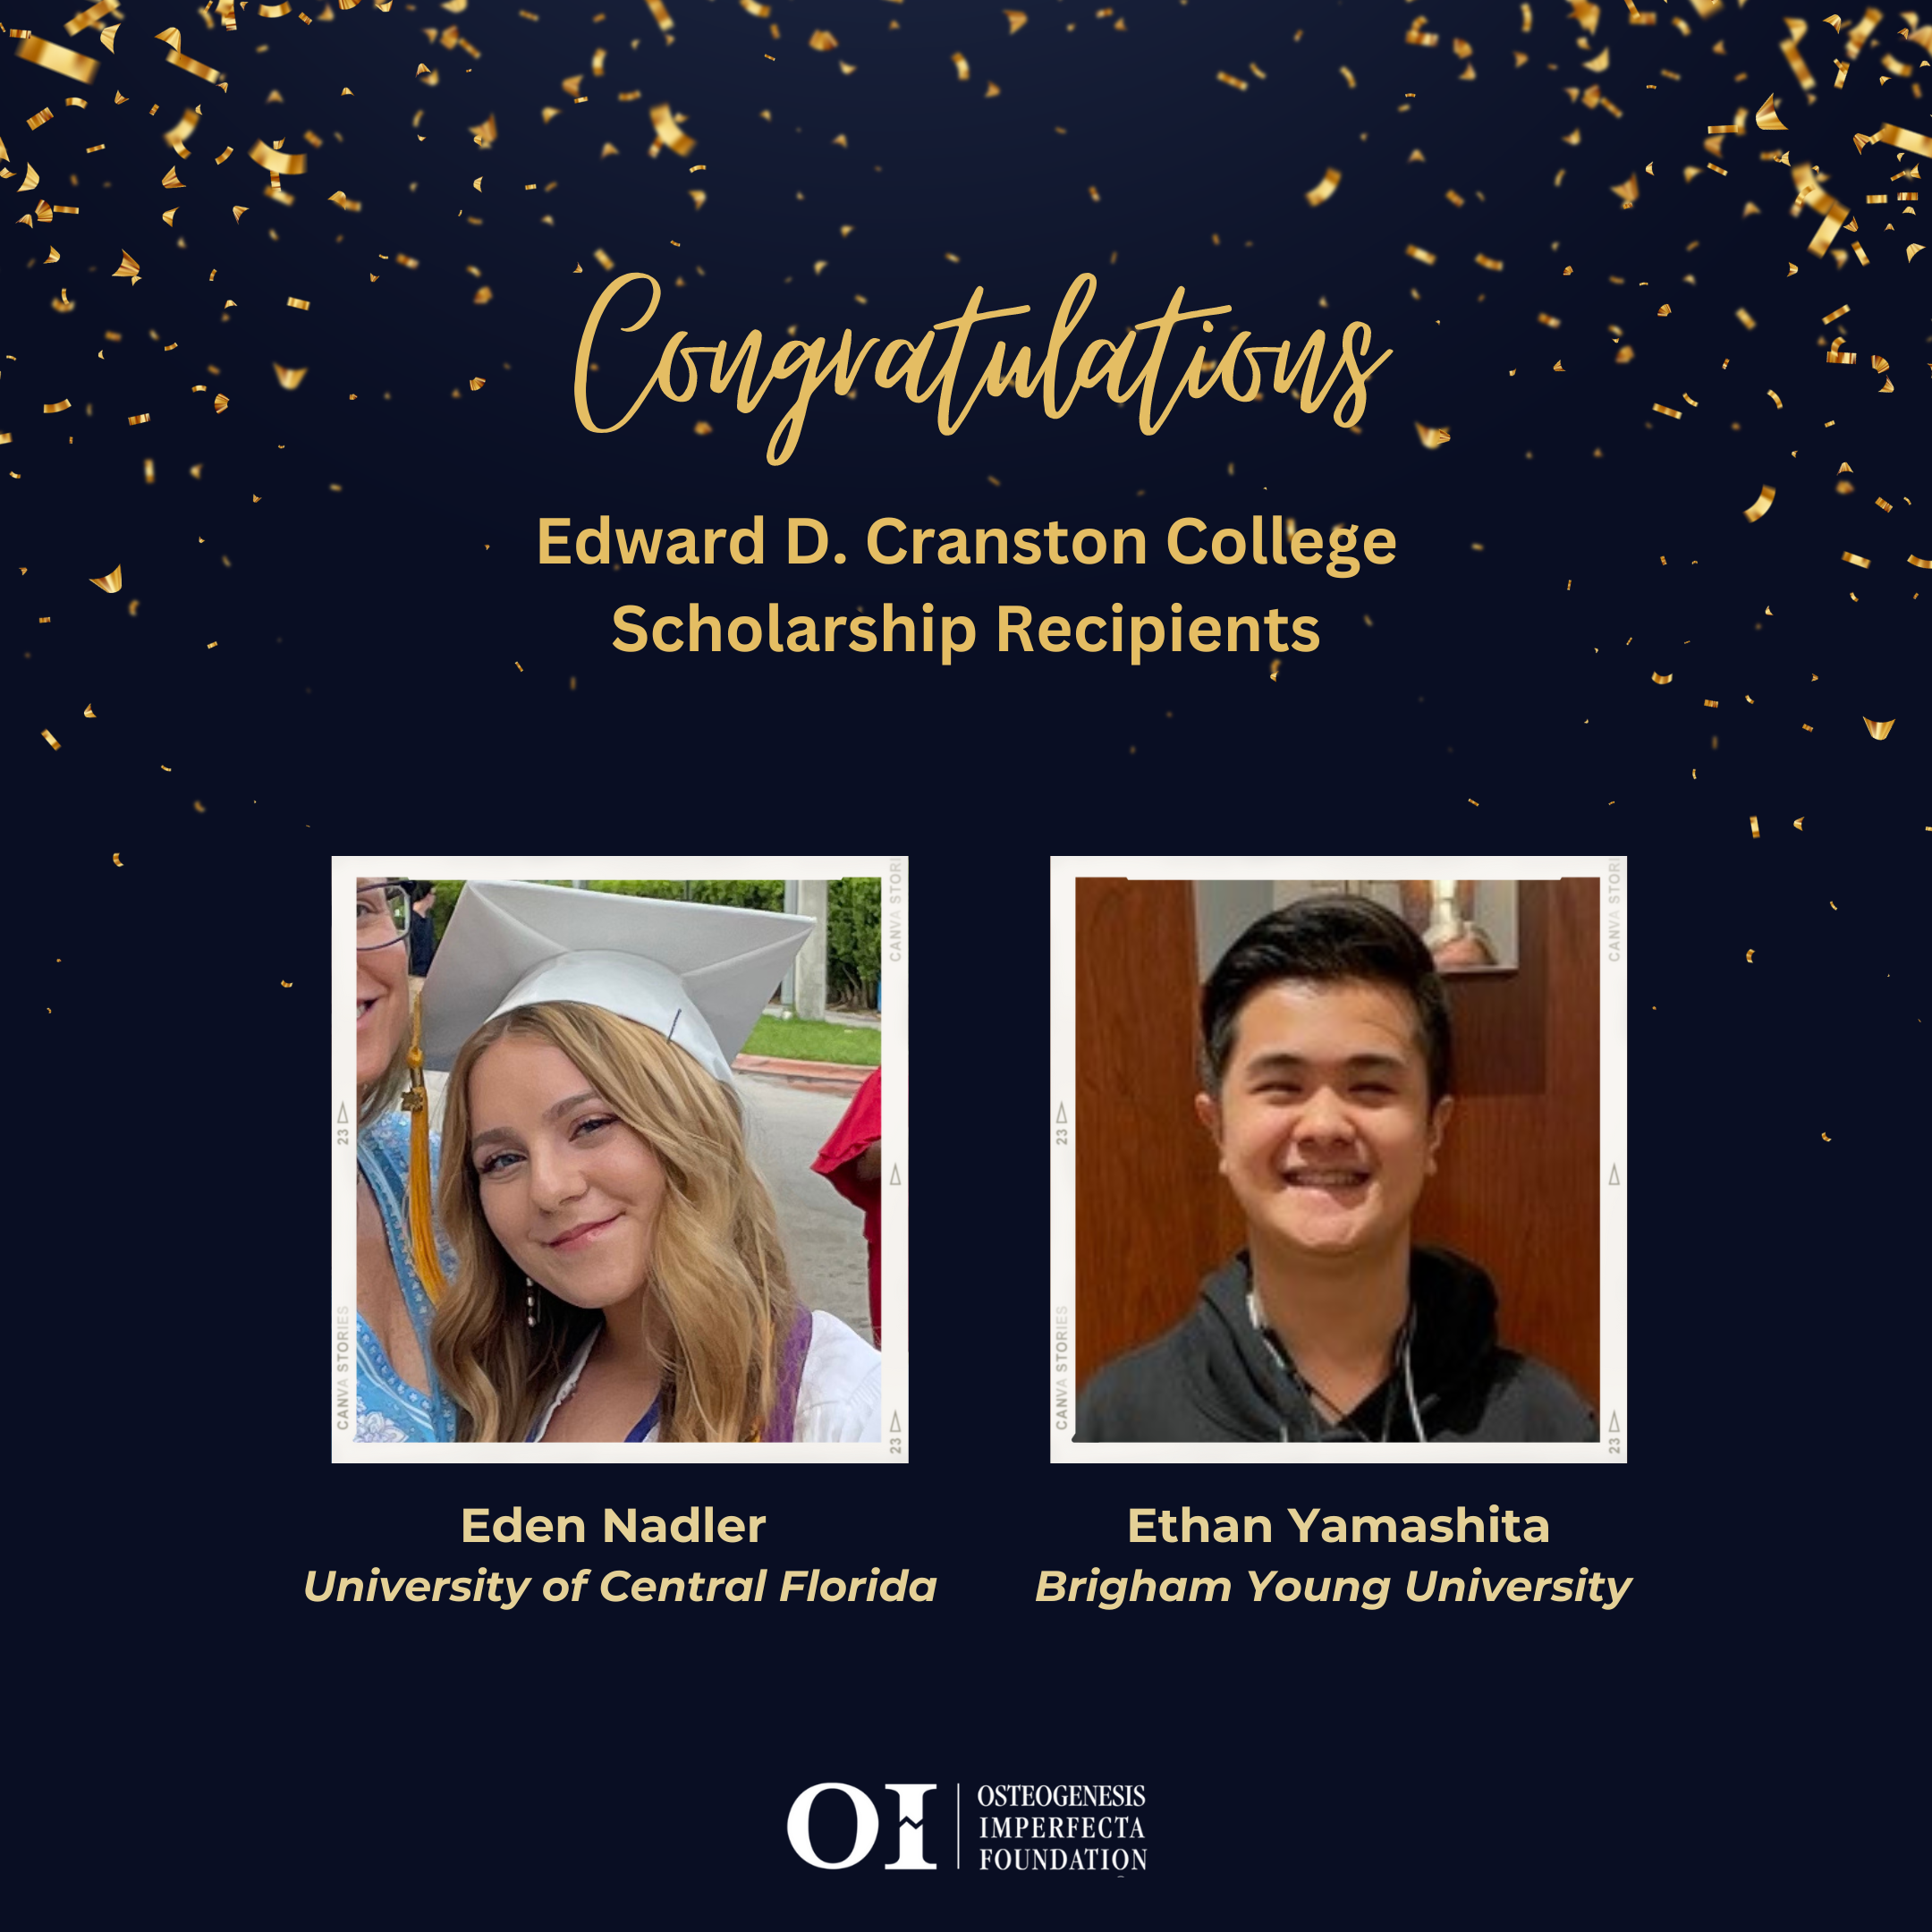 Congratulations to the first-year recipients of the Edward D. Cranston College Scholarship!